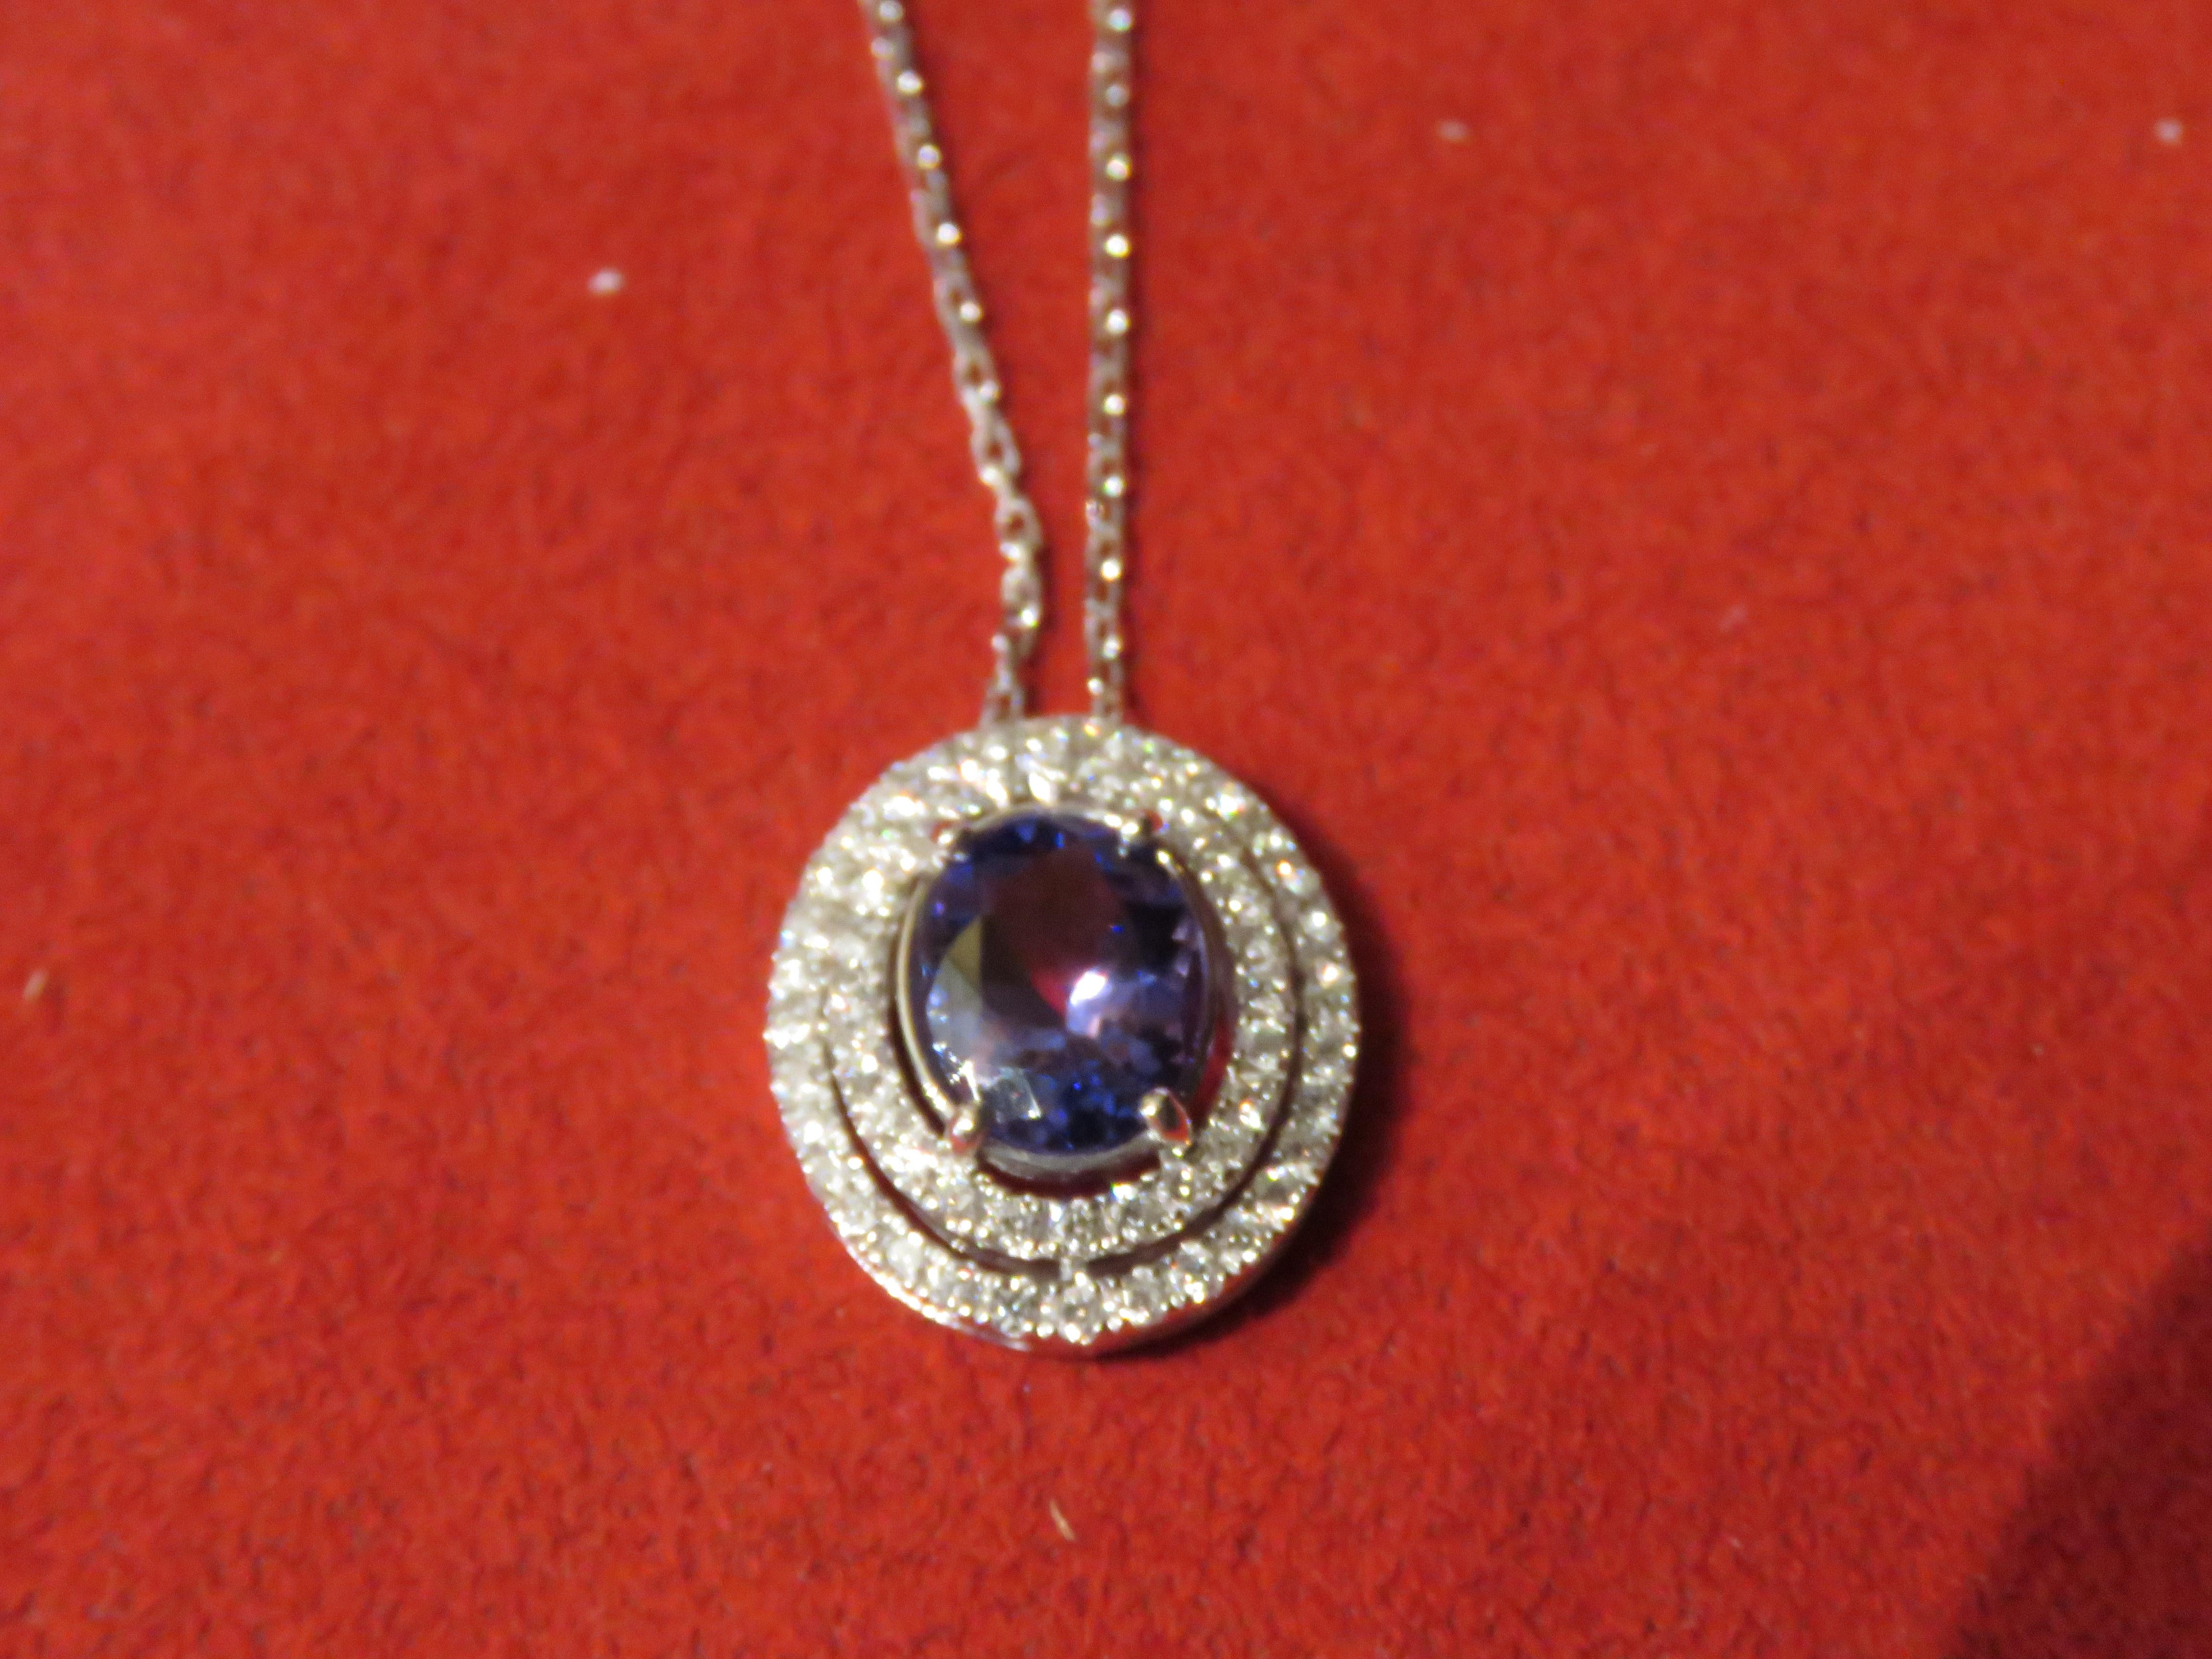 The Following Item we are offering is a Rare Important Radiant 18KT Gold Rare Fancy Gorgeous Oval Cut Tanzanite and Diamond Drop Pendant Necklace. Necklace is comprised of a Gorgeous Fancy Oval Cut Tanzanite surrounded and adorned with Beautiful